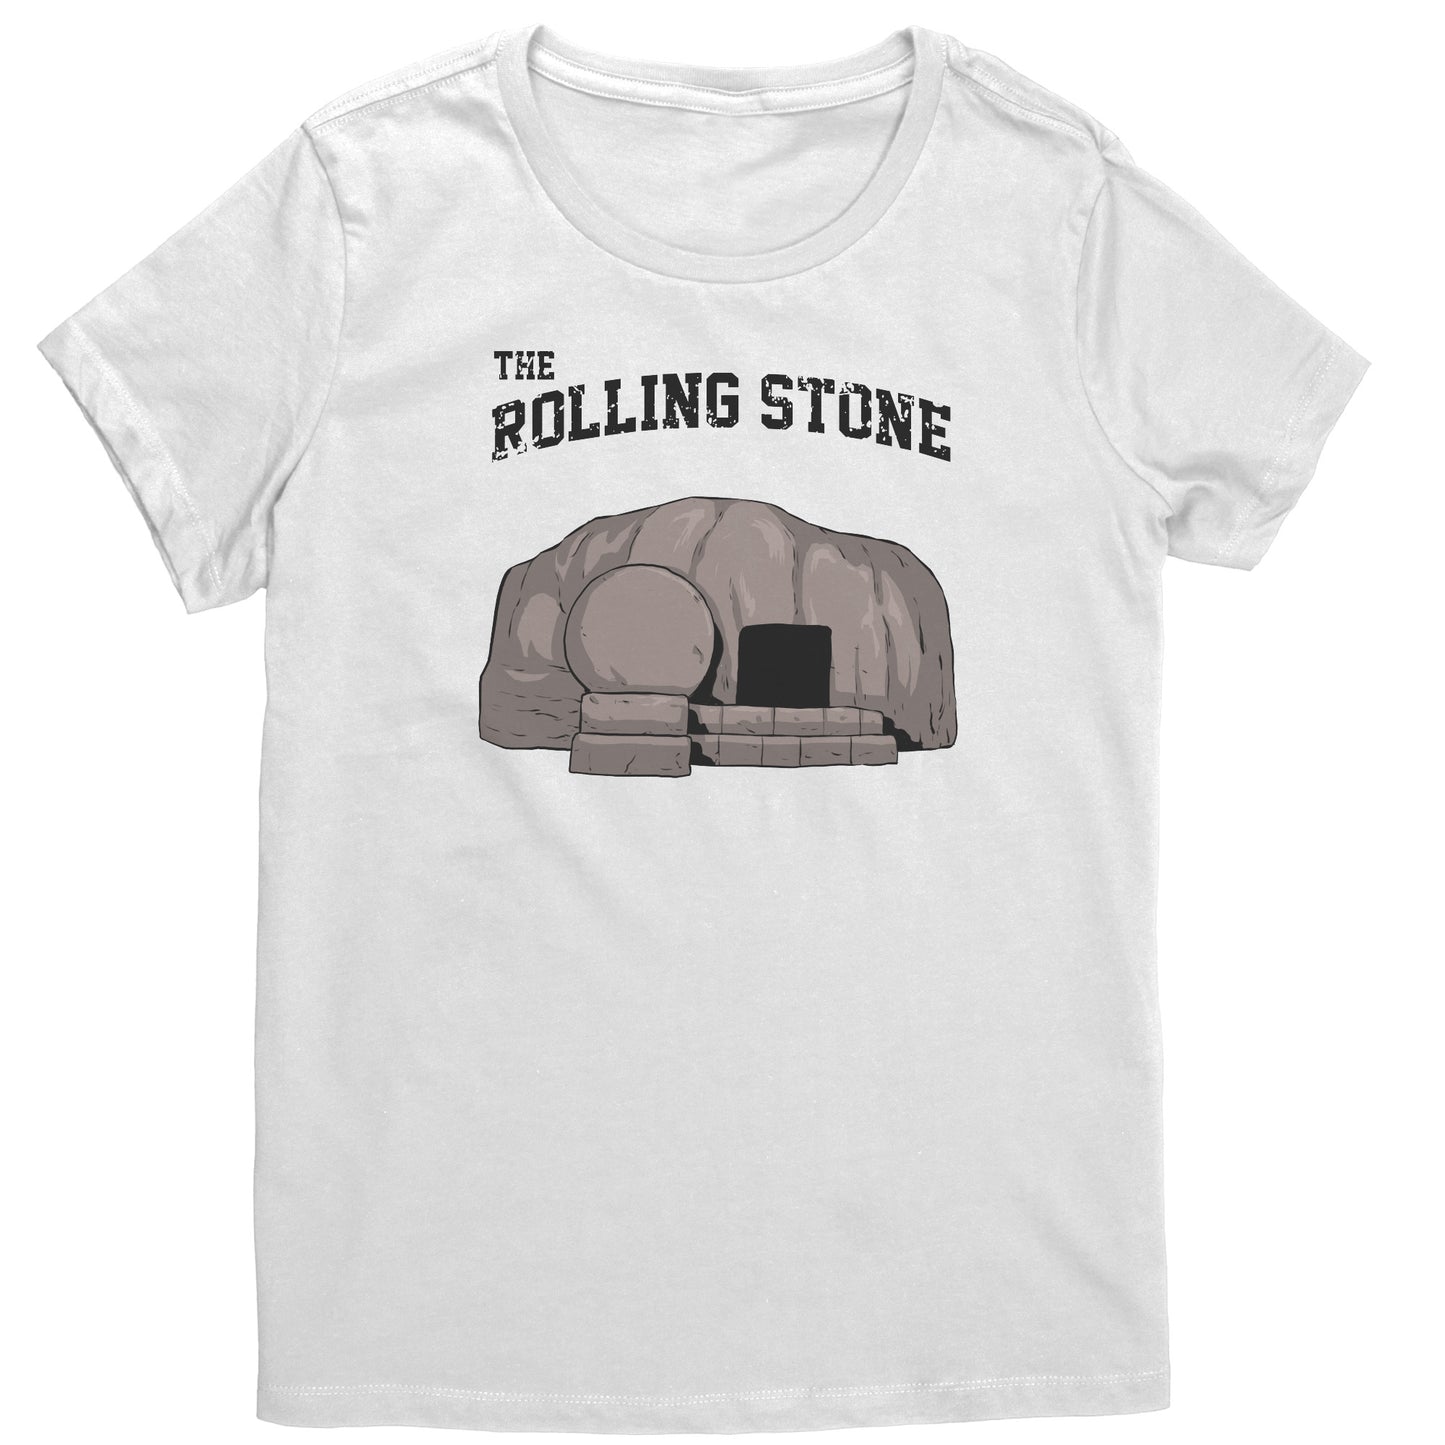 The Rolling Stone Women's T-Shirt Part 1